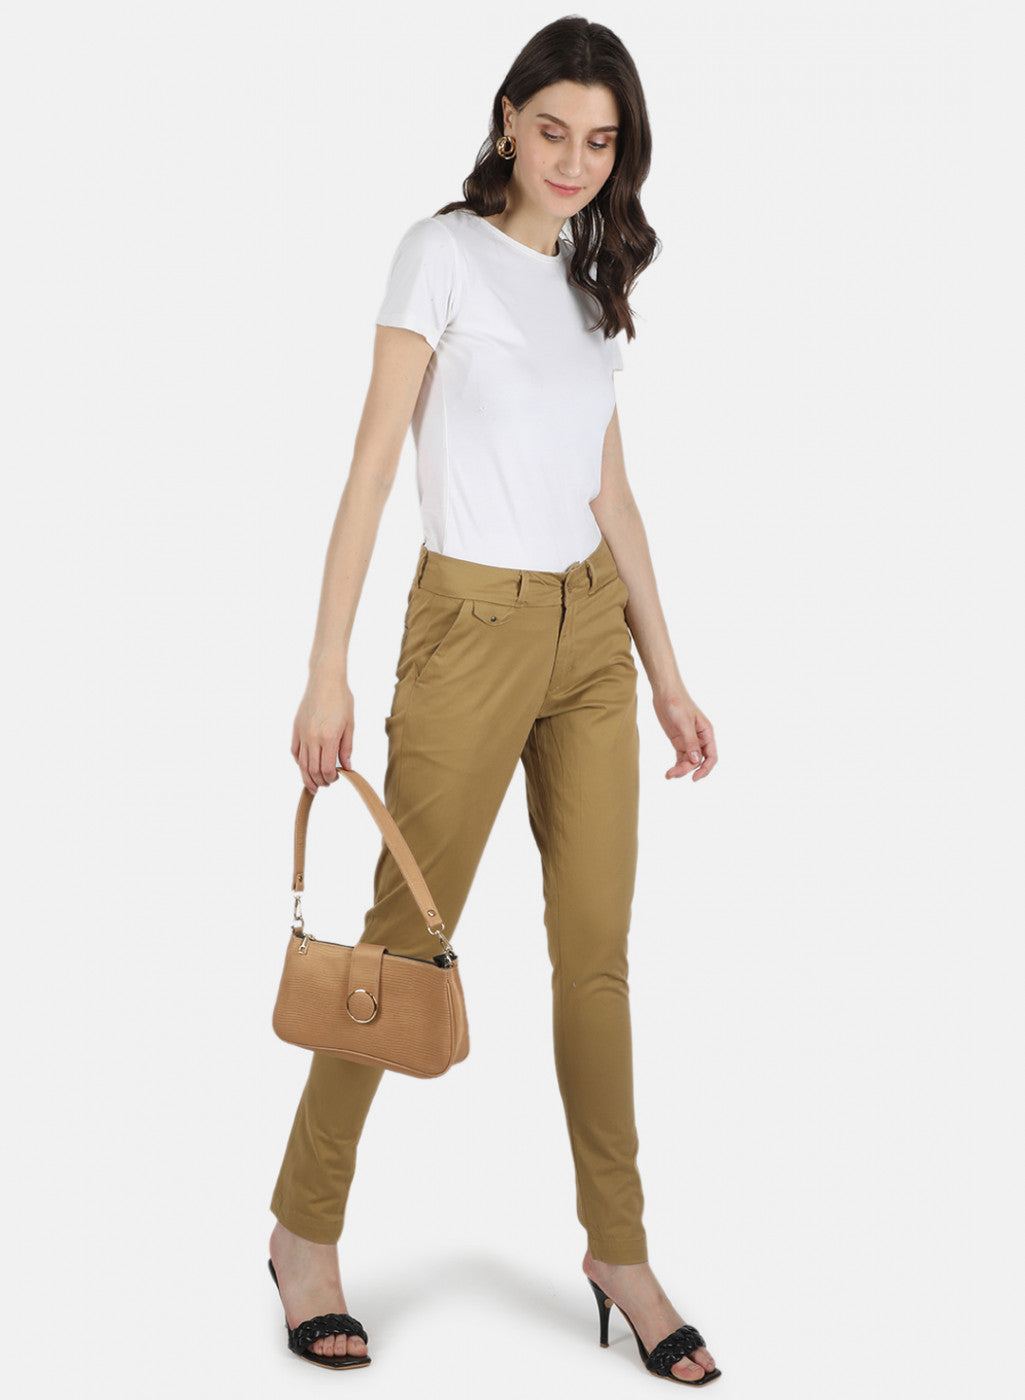 Eashery Pants for women Wide Leg High Waisted Casual Solid Wide Leg Trousers  (Solid Color,Khaki,XXL) - Walmart.com